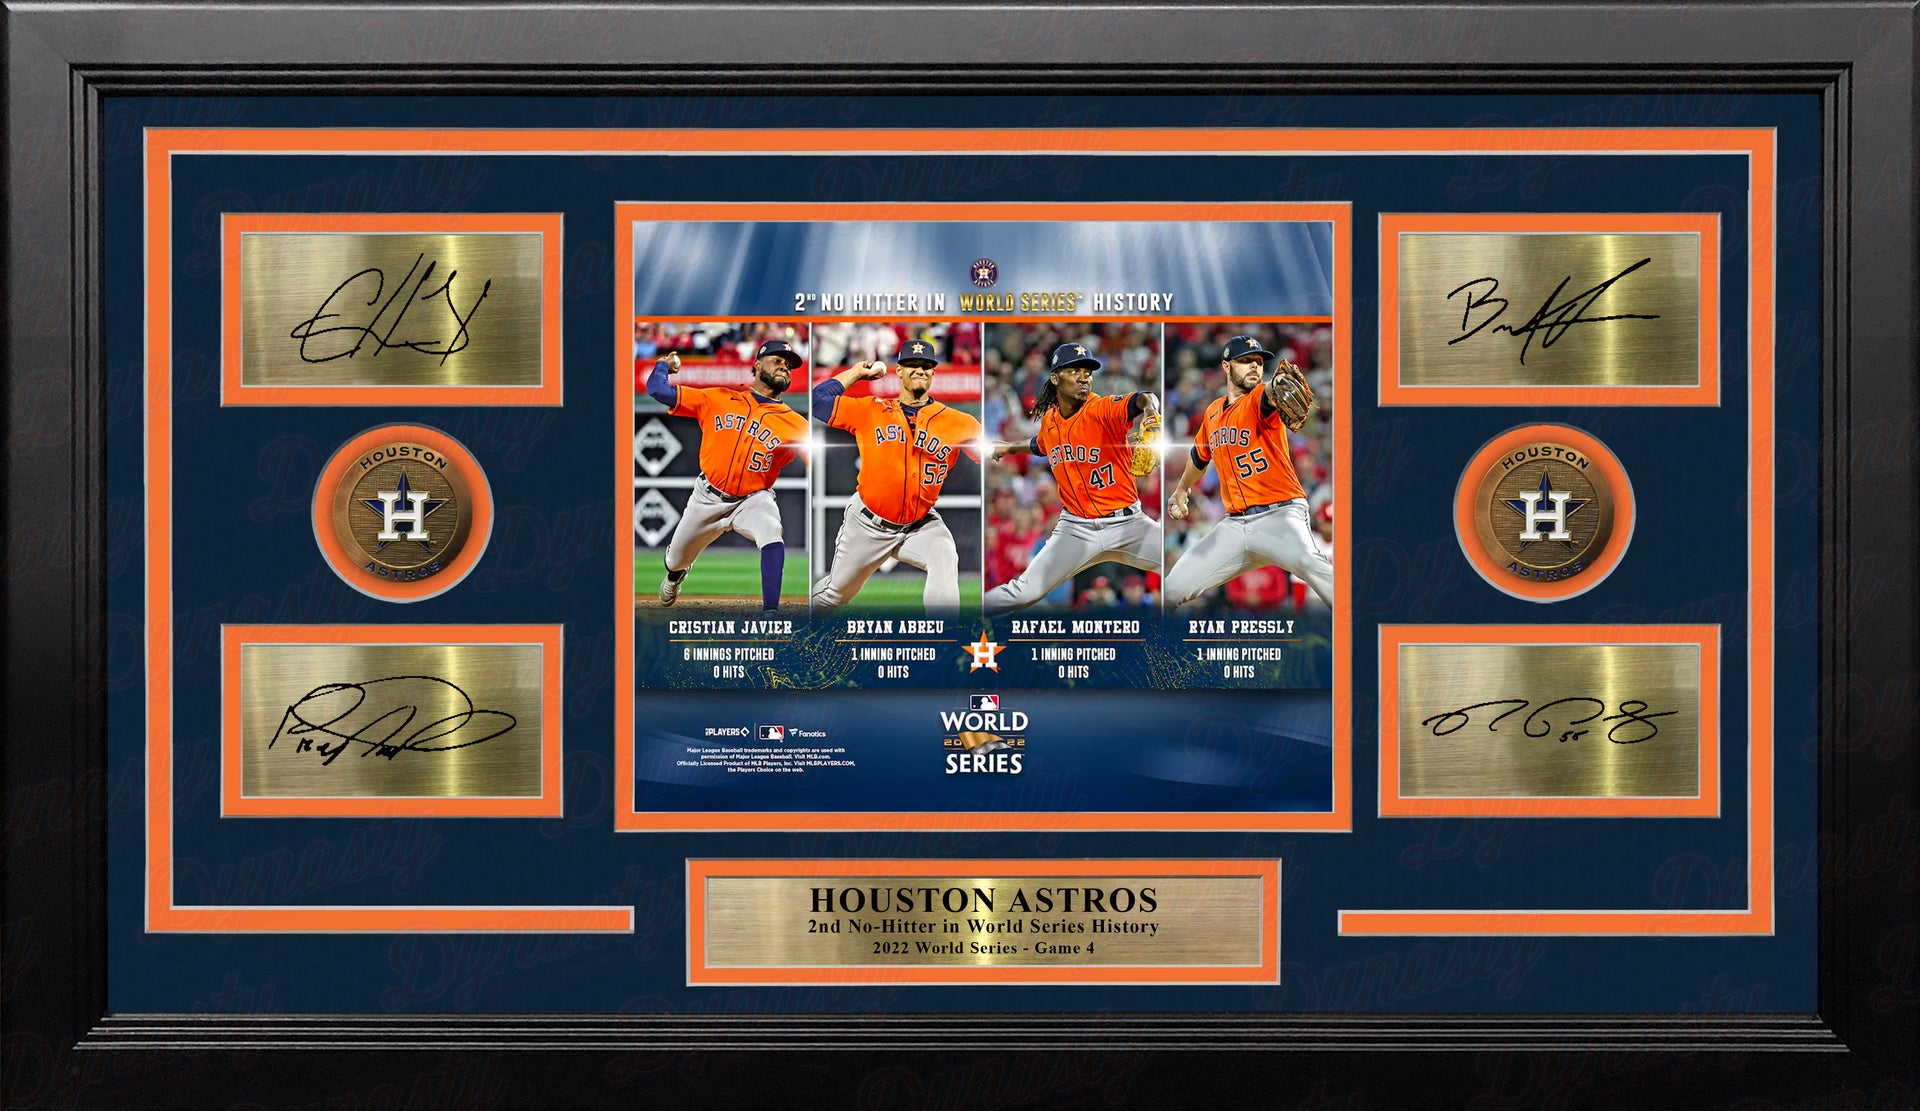 Houston Astros 2022 World Series No-Hitter 8" x 10" Framed Collage Photo with Engraved Autographs - Dynasty Sports & Framing 